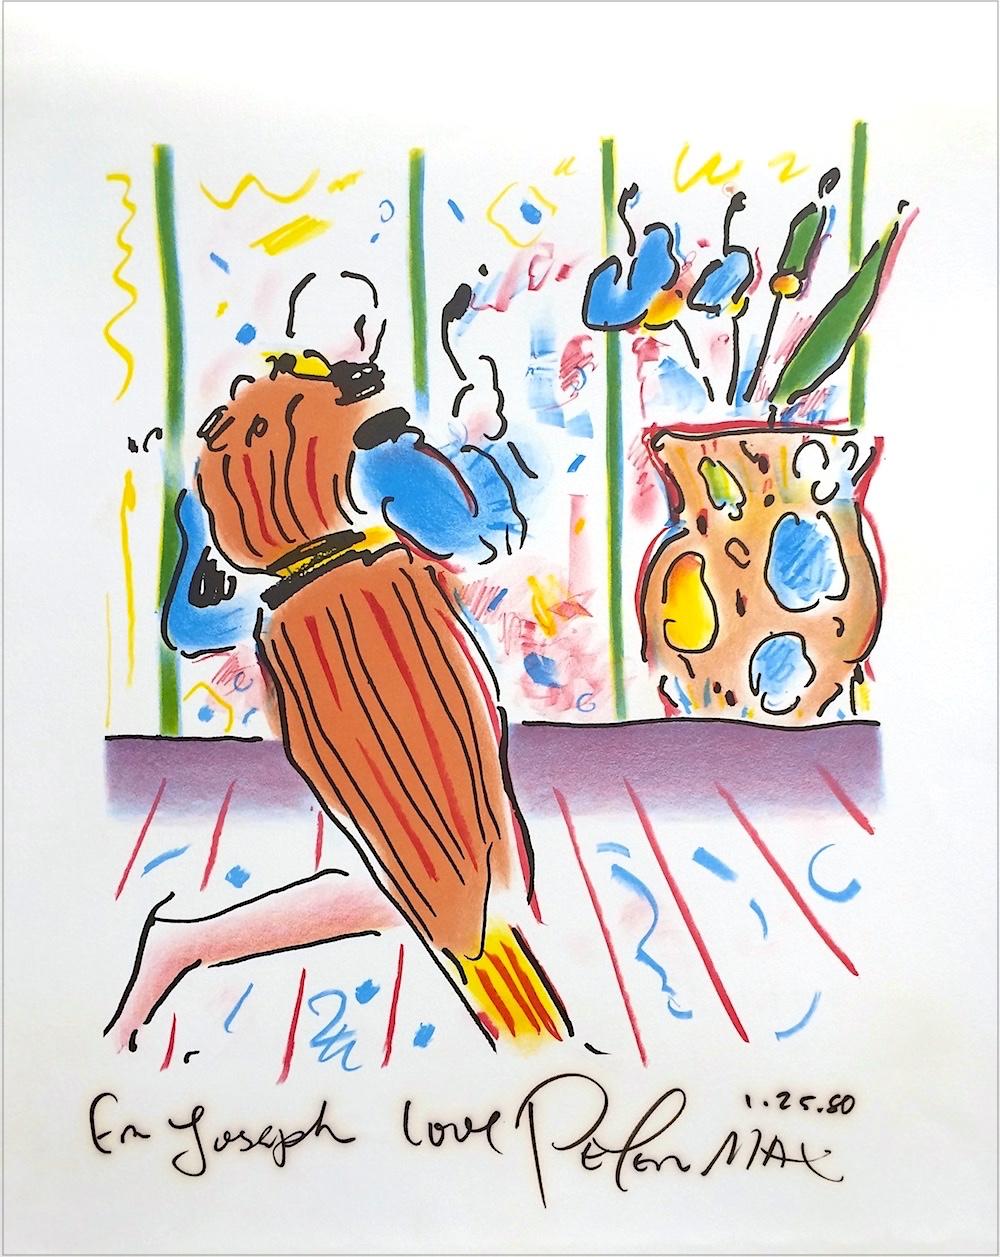 MONK AND VASE Signed Lithograph, Pop Art Interior, Striped Robe, Floor Vase - Print by Peter Max